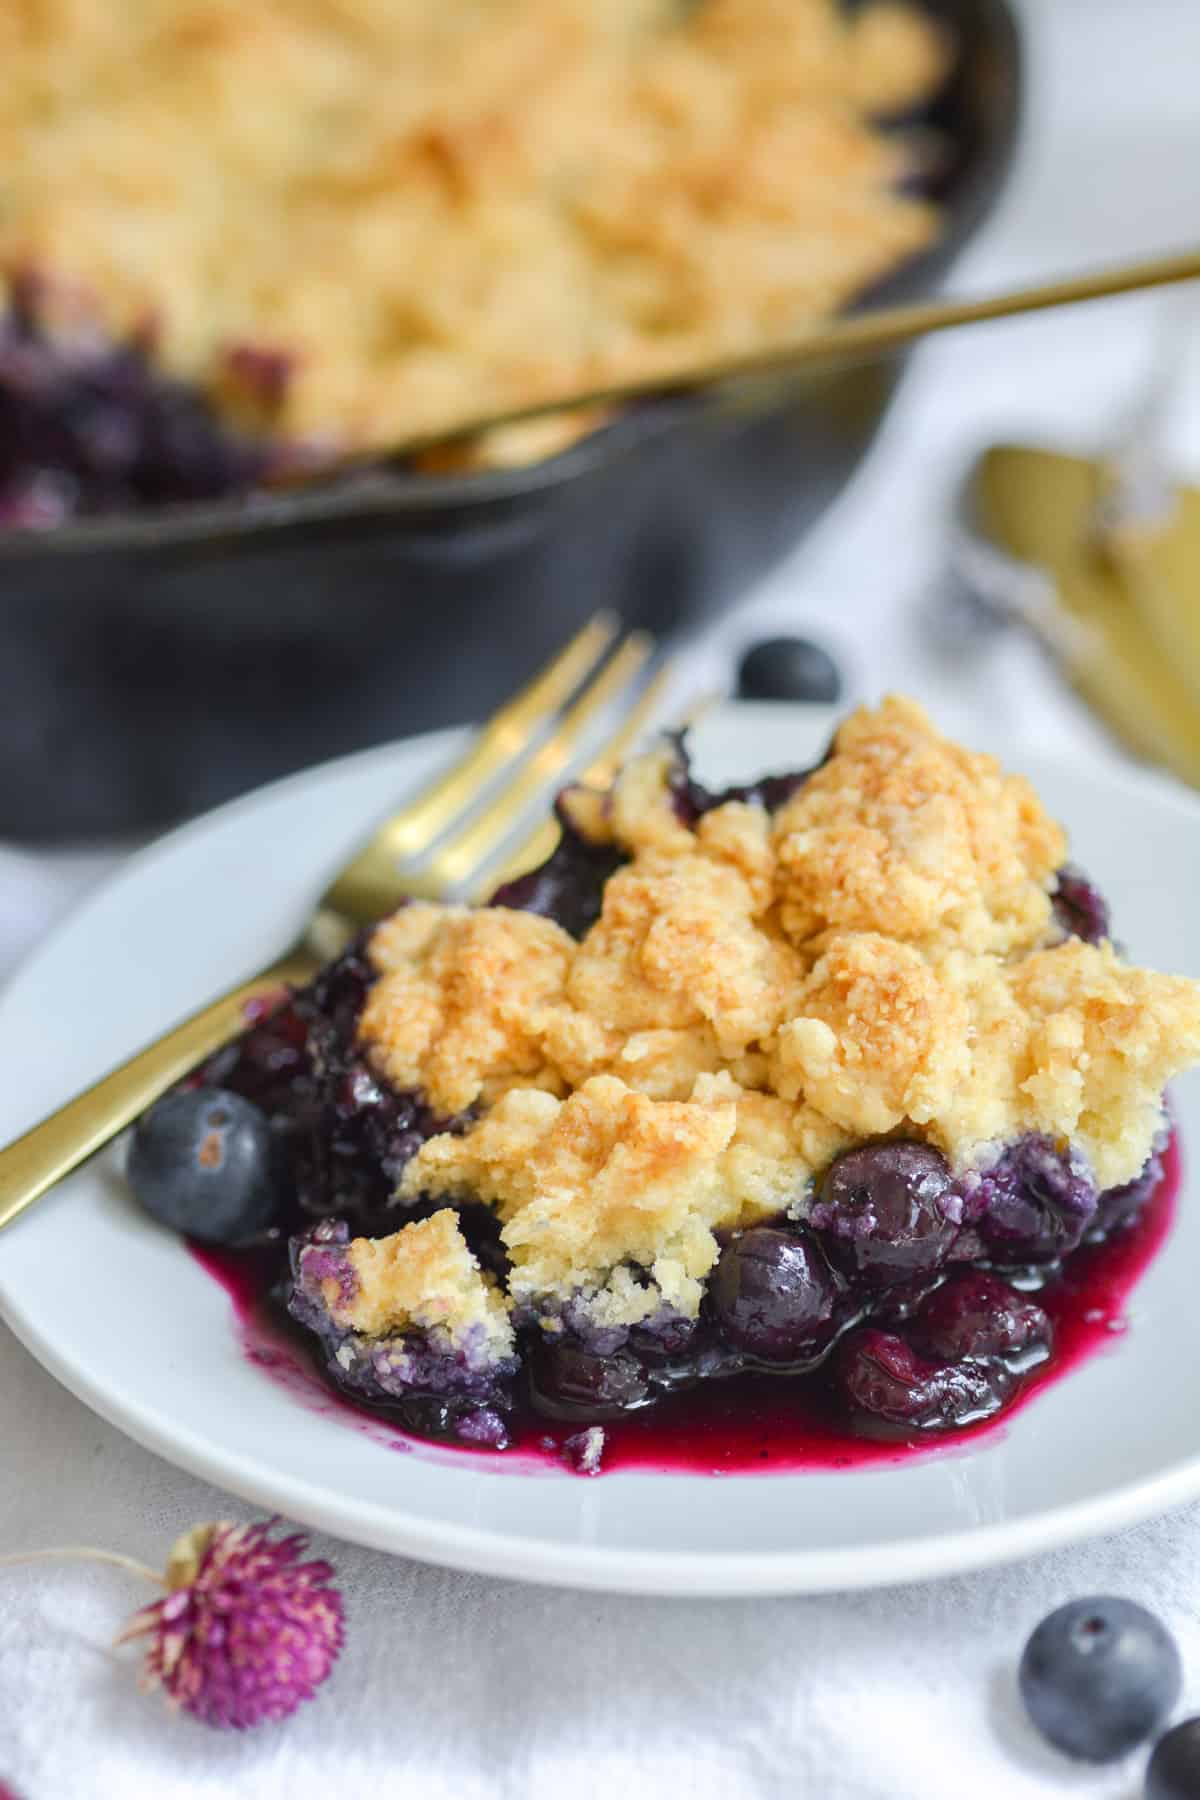 A scoop of vegan blueberry cobbler on a white plate with a gold fork.